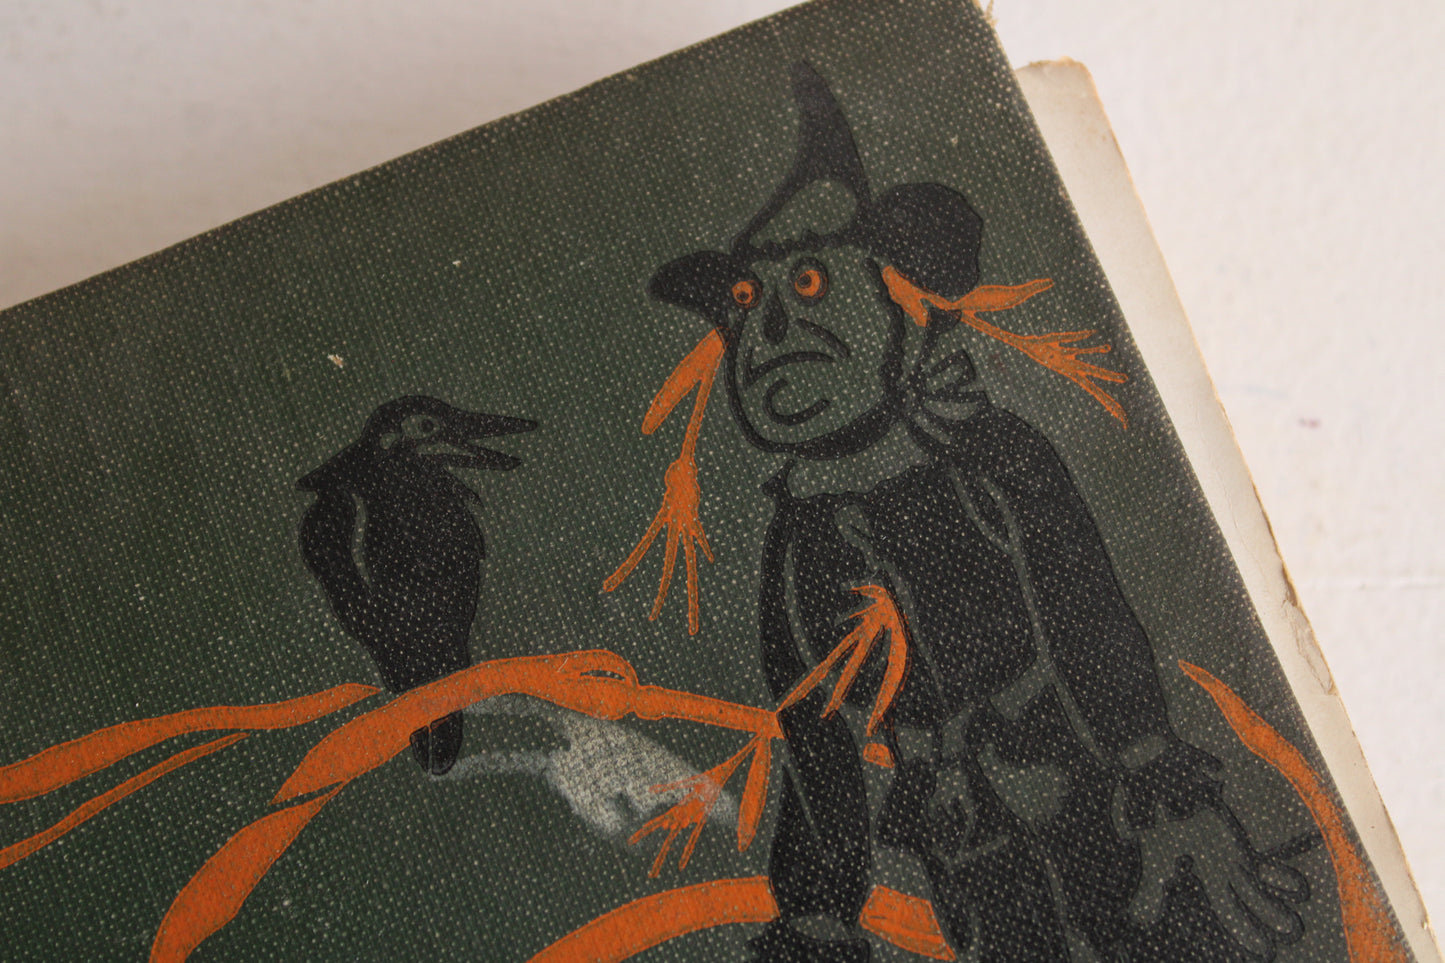 Antique 1903 Edition of The New Wizard of Oz by Frrank Baum